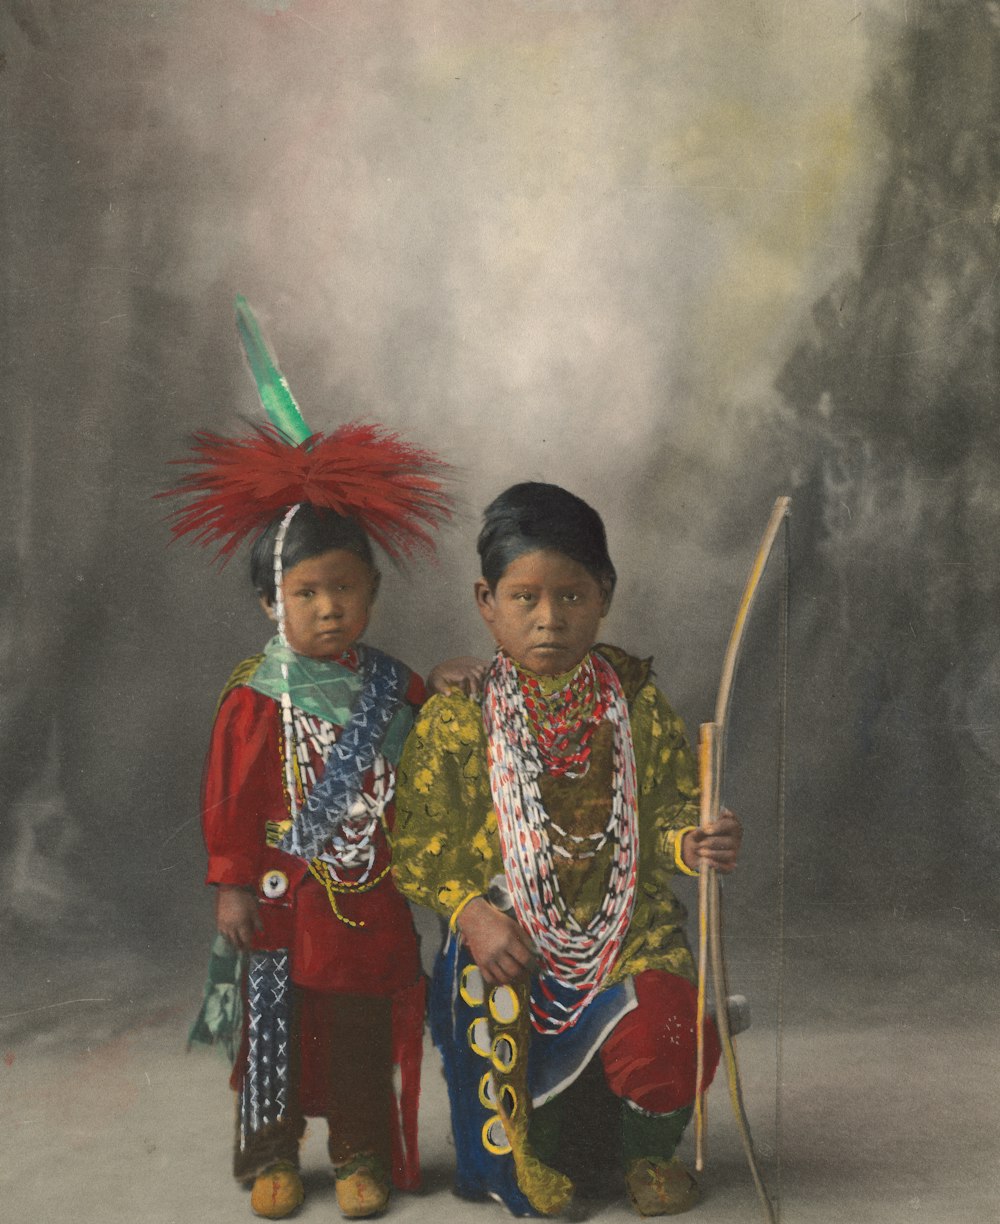 2 women in traditional dress holding stick